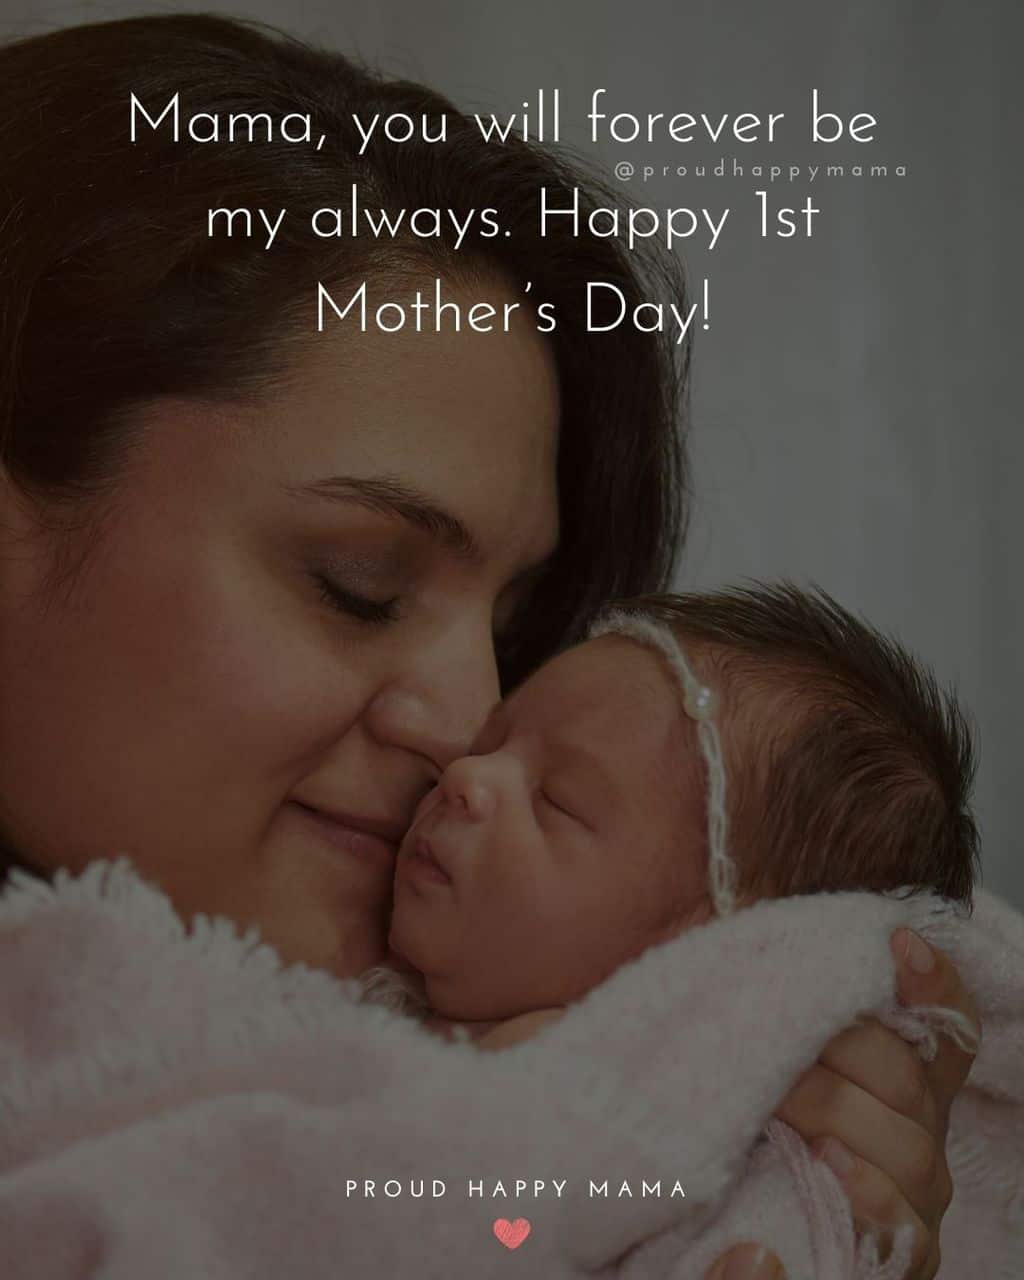 First Mothers Day Quotes - Mama, you will forever be my always. Happy 1st Mother’s Day!’